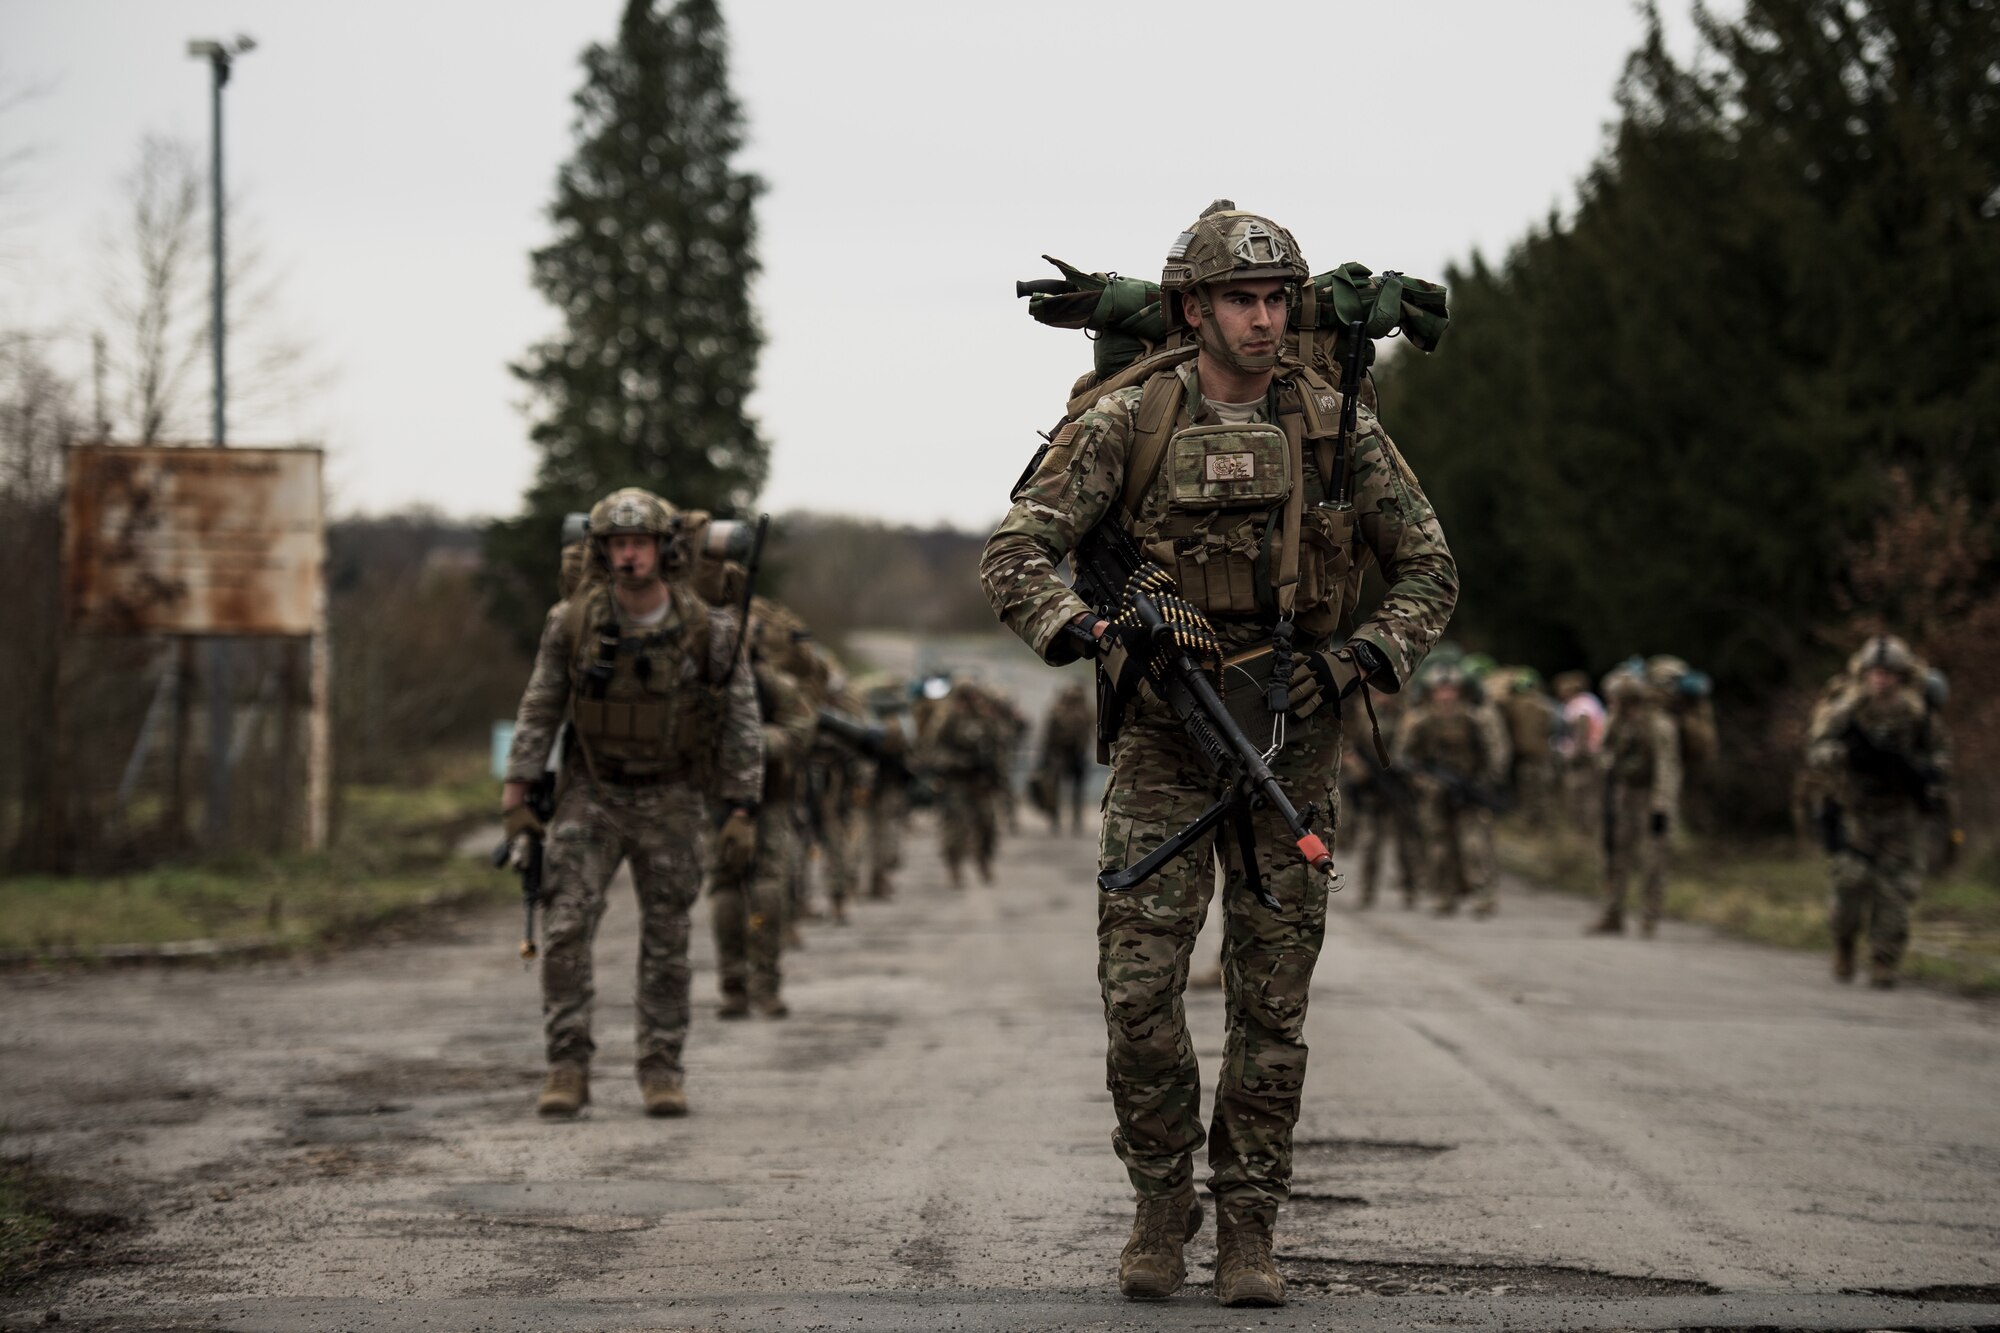 U.S. Air Force Staff Sgt. Quintan Ortega, 435th Security Forces Squadron contingency response fire-team leader, leads a squad to a rally point during exercise Frozen Defender in Grostenquin, France, Jan. 14, 2020. Frozen Defender tests the squadron’s capabilities in a contested environment under harsh conditions. The training location is among several sites which are shared between the U.S., French and German air forces. (U.S. Air Force photo by Staff Sgt. Devin Boyer)